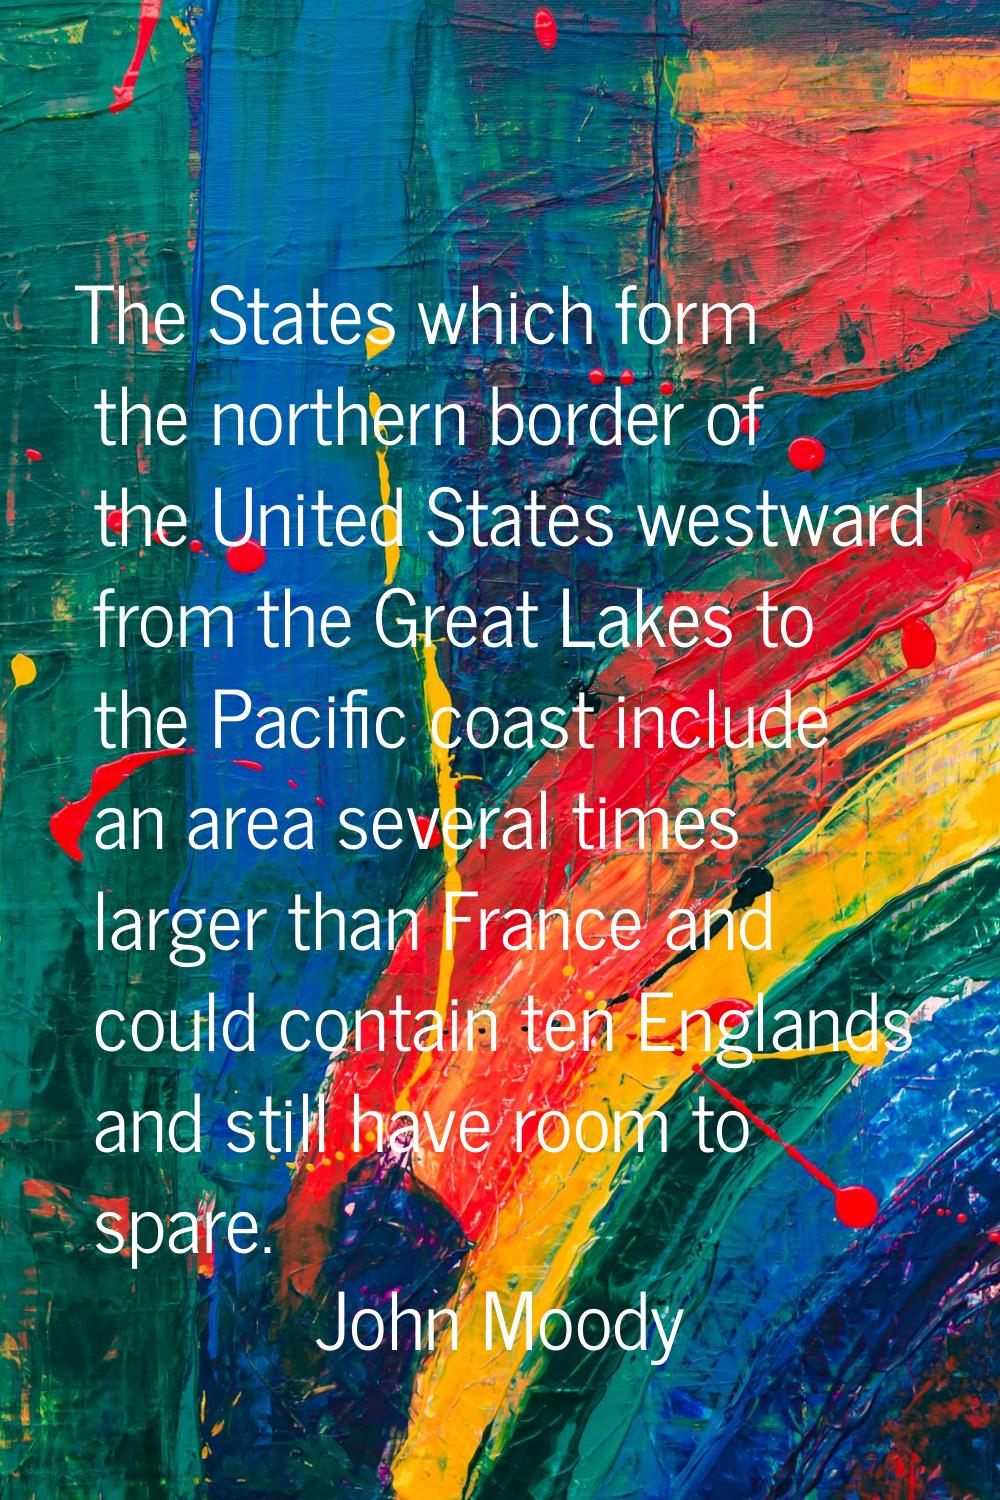 The States which form the northern border of the United States westward from the Great Lakes to the